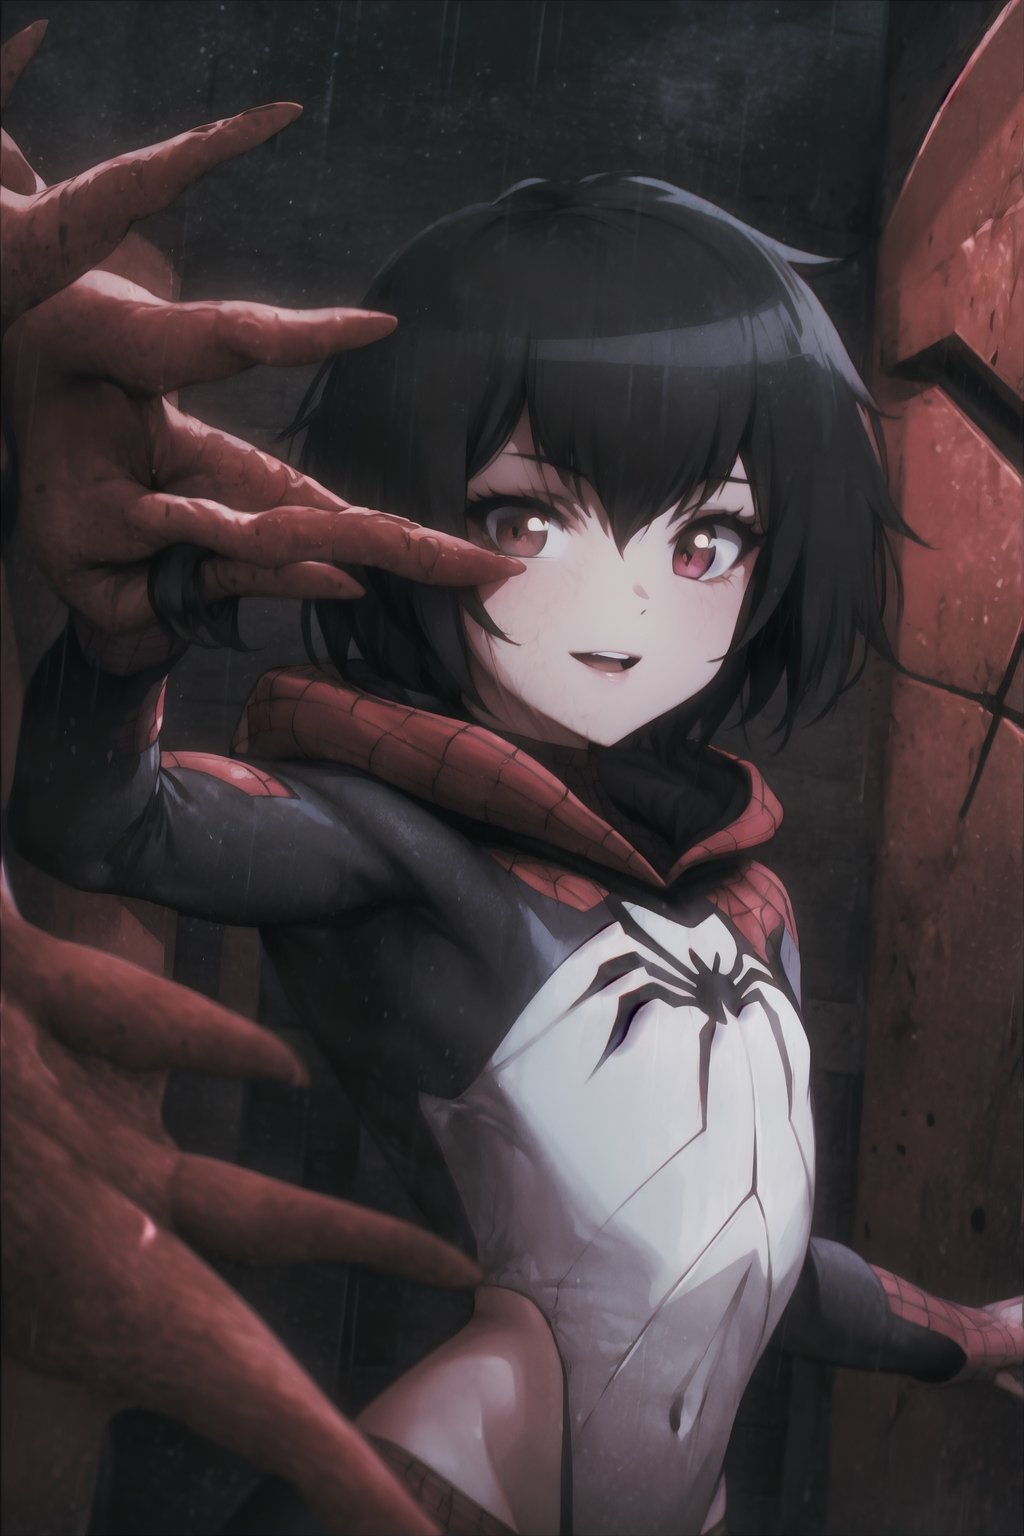 8k resolution, high resolution, masterpiece, intricate details, highly detailed, HD quality, solo, loli, short stature, little girls, only girls, dark background, rain, scarlet moon, crimson moon, moon, moon on the background, science fiction, science fiction city, red neon, blood red neon, burgundy red neon,

Peni Parker.red eyes.shining scarlet eyes.shining eyes.black hair.short haircut.slim build.teenage girl.Spiderman.Marvel.superhero.young woman.slim build.the red web.tight-fitting suit.black and red clothes.black spider print on the chest.black spider emblem.spider print.black print.hood.stretched hood.cheked smile.funny expression.fighting pose,

focus on the whole body, the whole body in the frame, the body is completely in the frame, the body does not leave the frame, detailed hands, detailed fingers, perfect body, perfect anatomy, wet bodies, rich colors, vibrant colors, detailed eyes, super detailed, extremely beautiful graphics, super detailed skin, best quality, highest quality, high detail, masterpiece, detailed skin, perfect anatomy, perfect body, perfect hands, perfect fingers, complex details, reflective hair, textured hair, best quality,super detailed,complex details, high resolution,

,AGGA_ST011,ChronoTemp ,illya,Star vs. the Forces of Evil ,Captain kirb,jtveemo,JCM2,Mrploxykun,Gerph ,Jago,Overlord,Artist,penini,C7b3rp0nkStyle,High detailed ,neon palette,perfecteyes,horror,fantasy00d